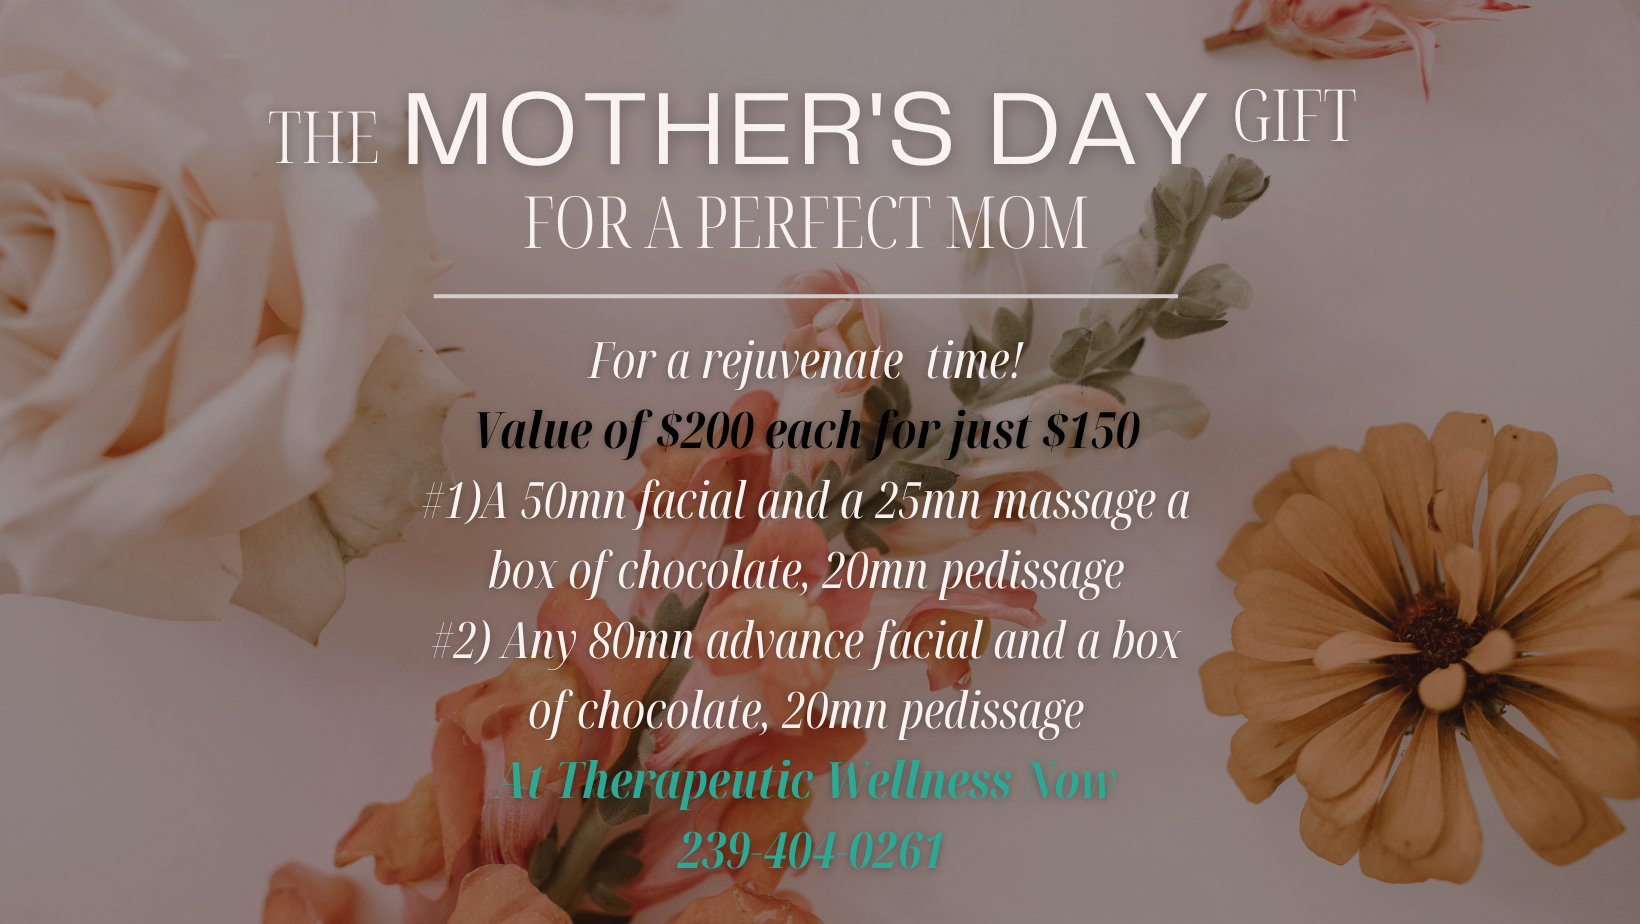 Mother's Day gift promo